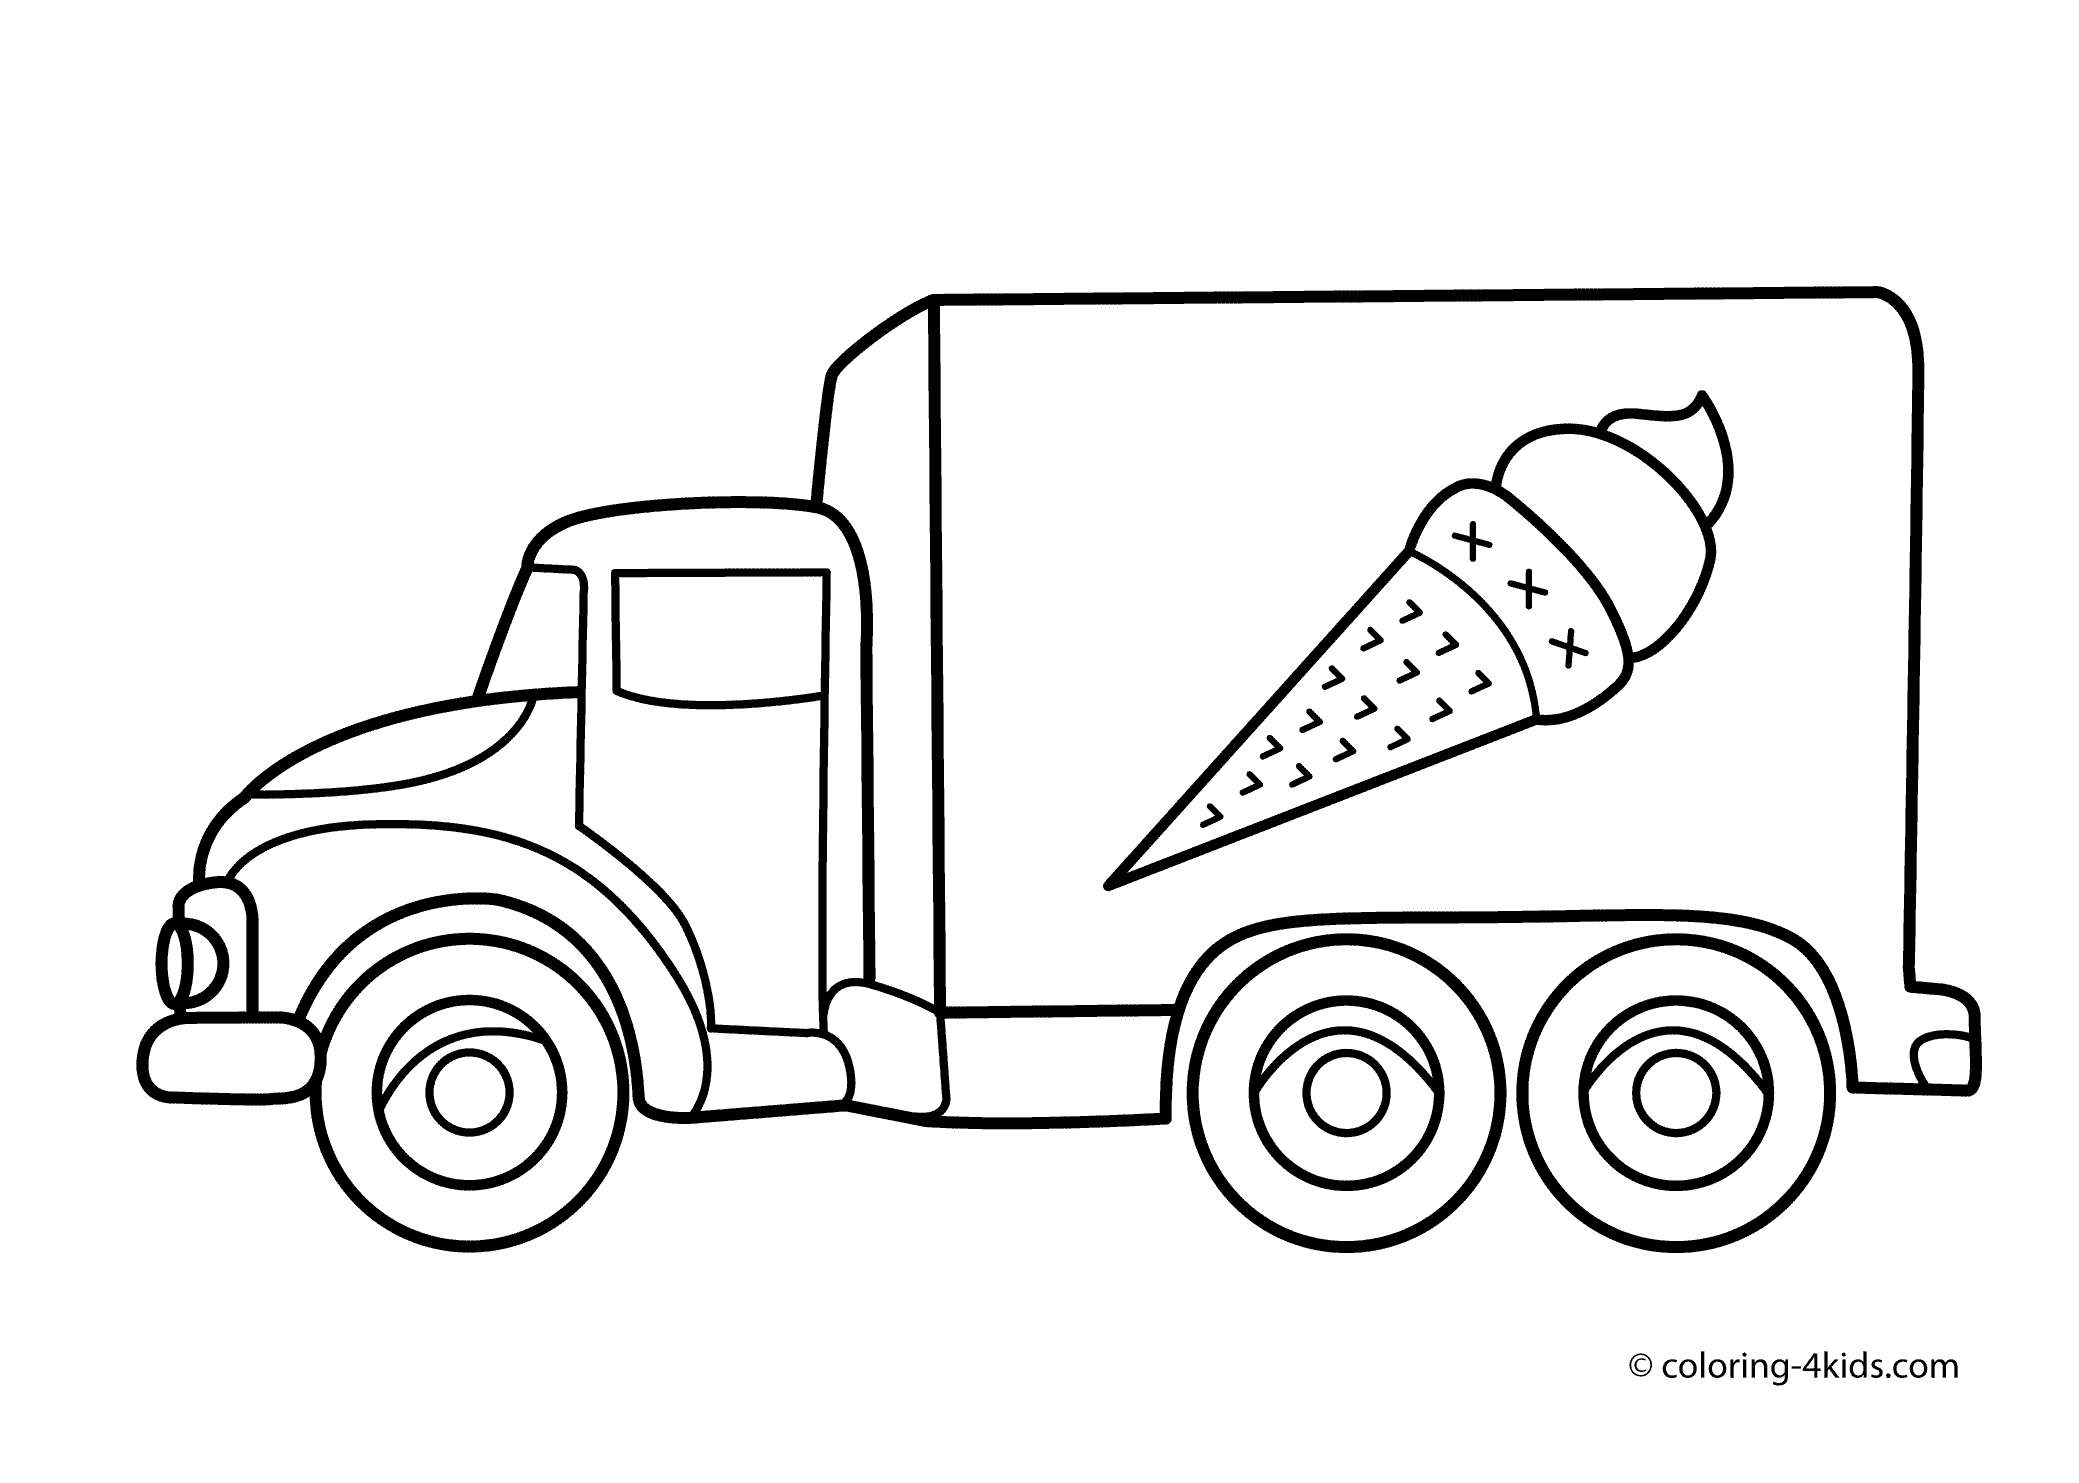 Free truck pictures.